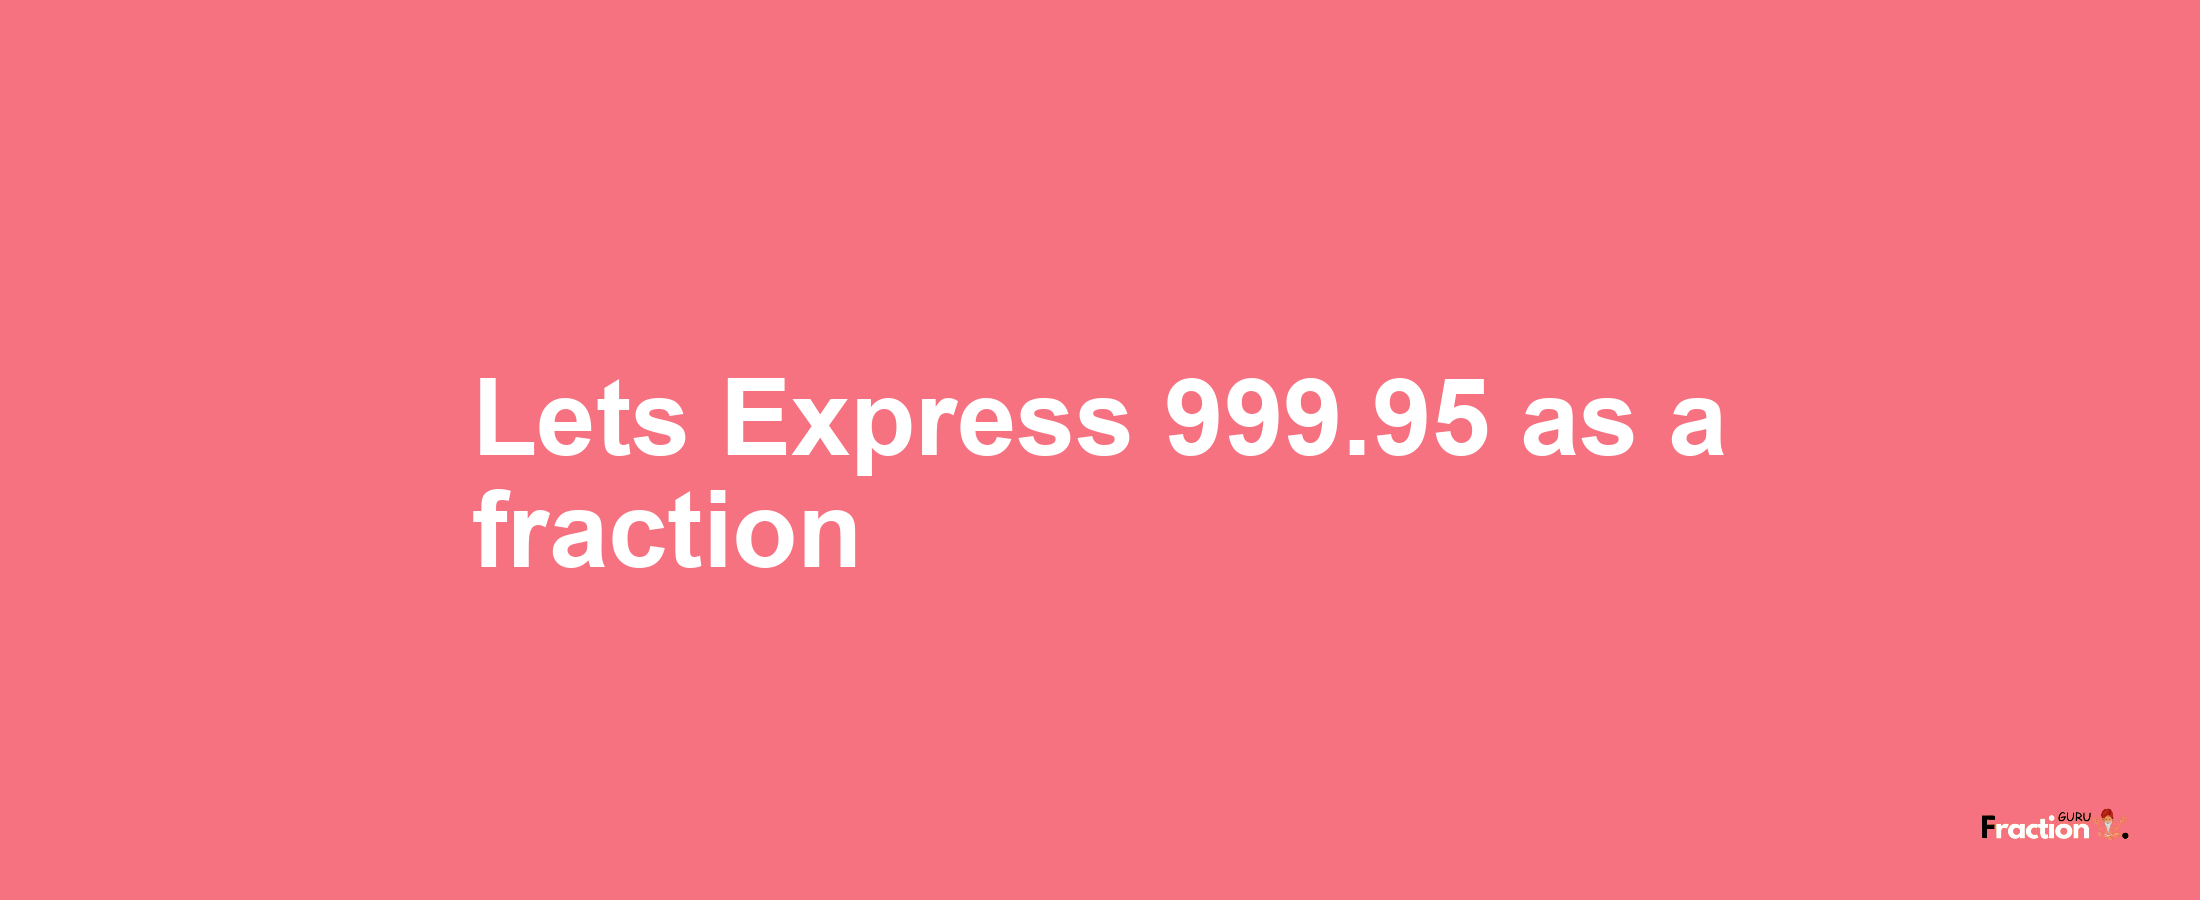 Lets Express 999.95 as afraction